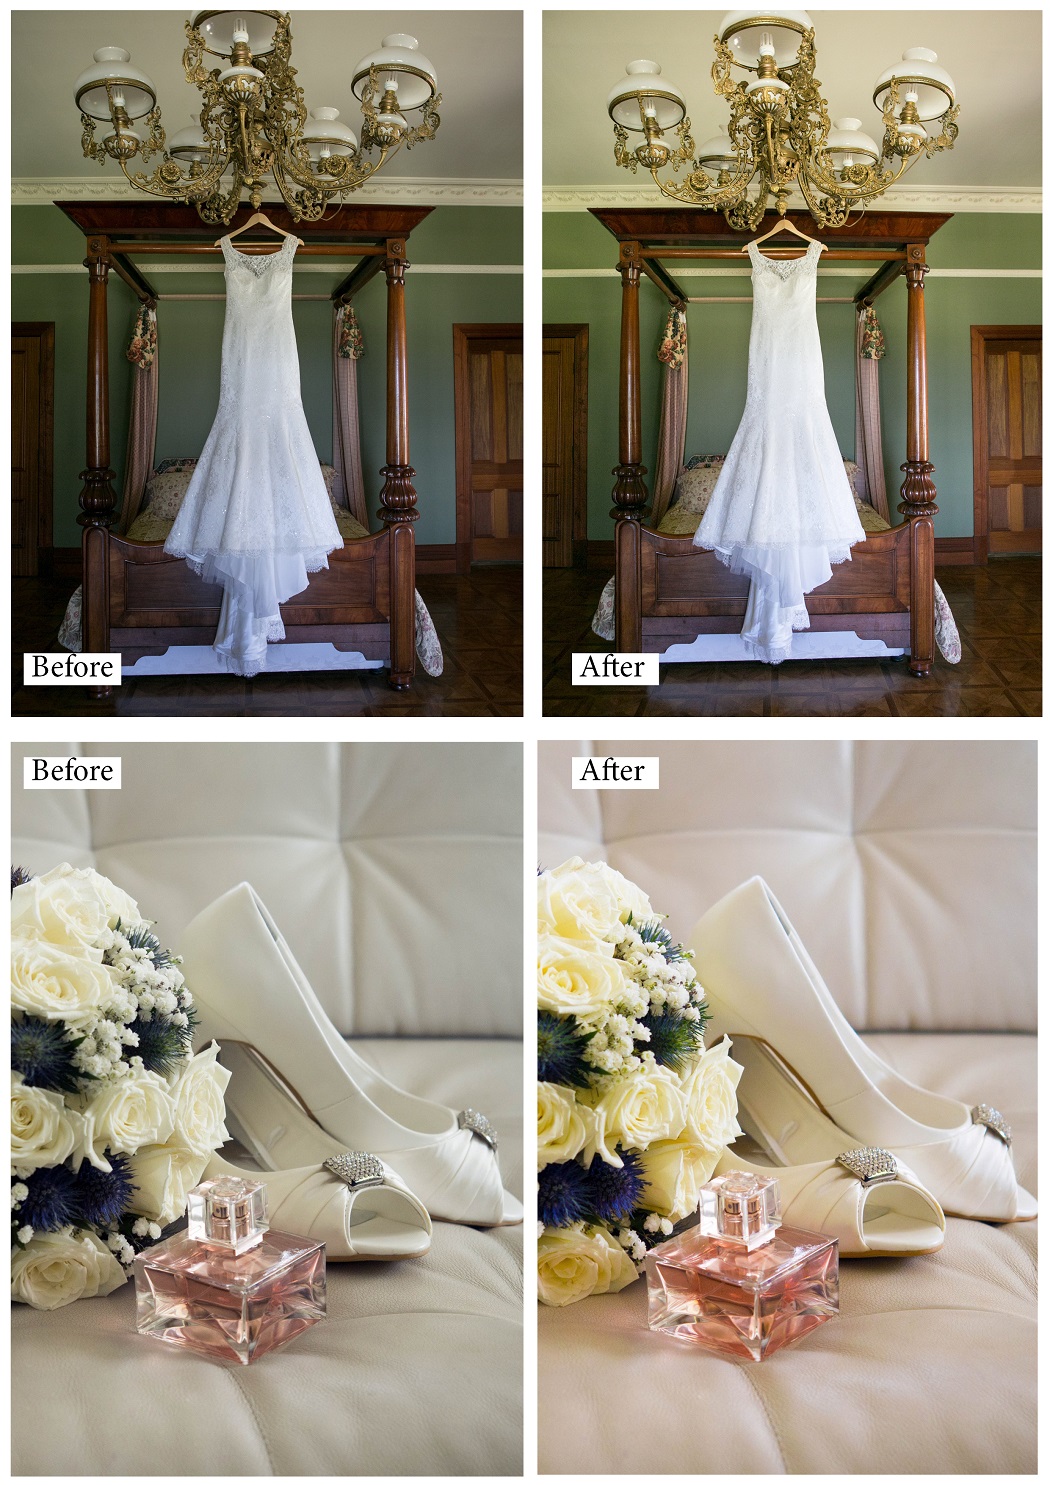 examples of before + after a wedding photo edit